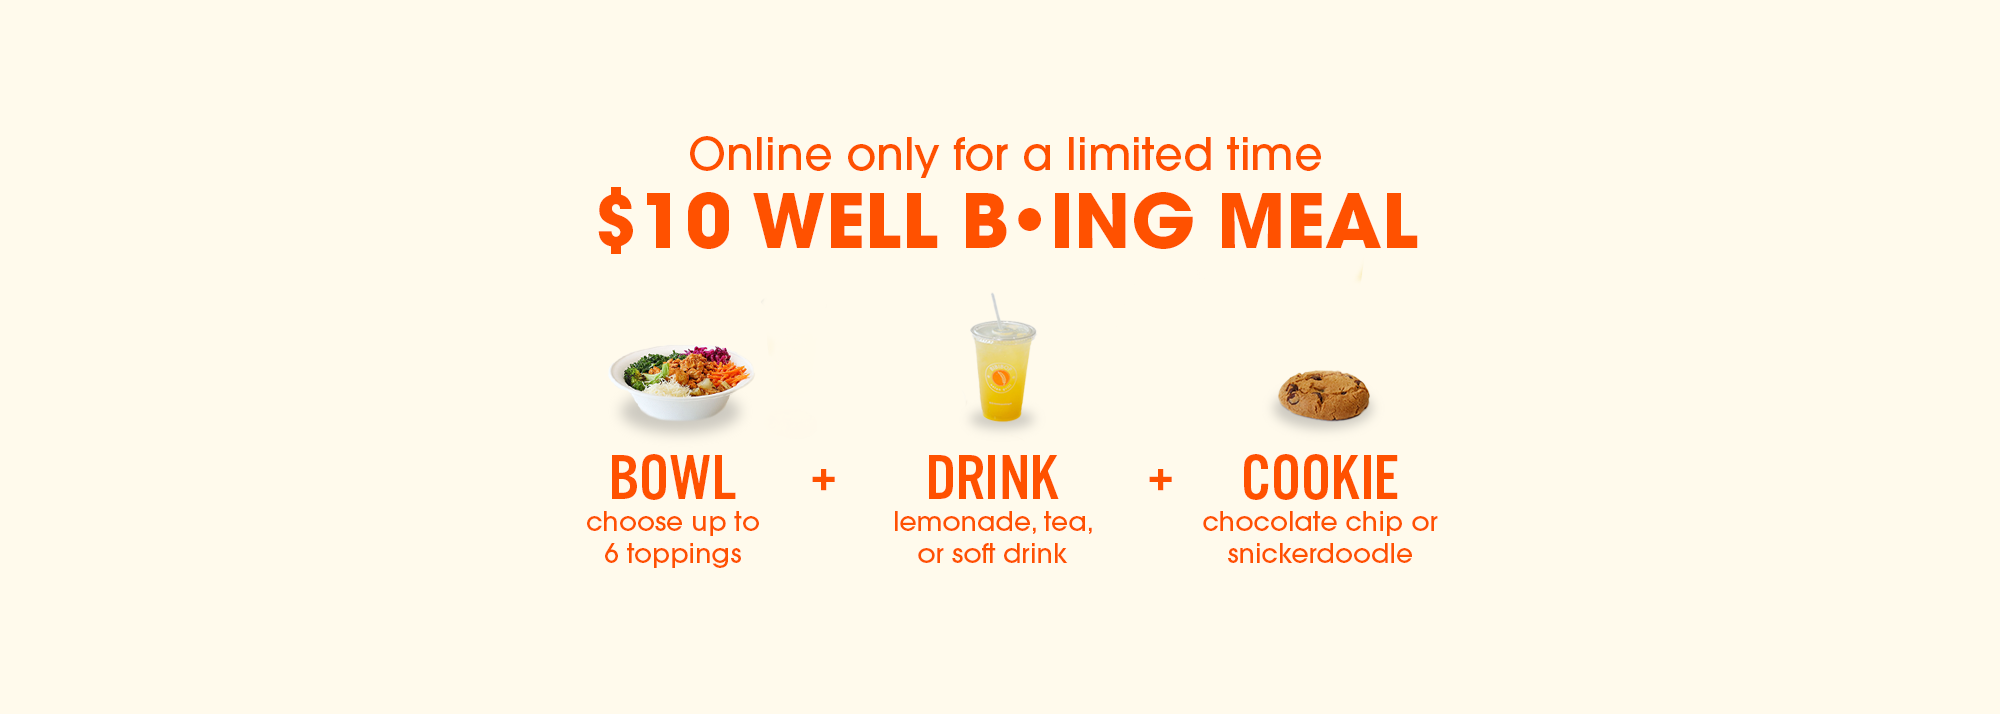 Online only for a limited time $10 Well Being Meal including Bowl + Drink + Cookie